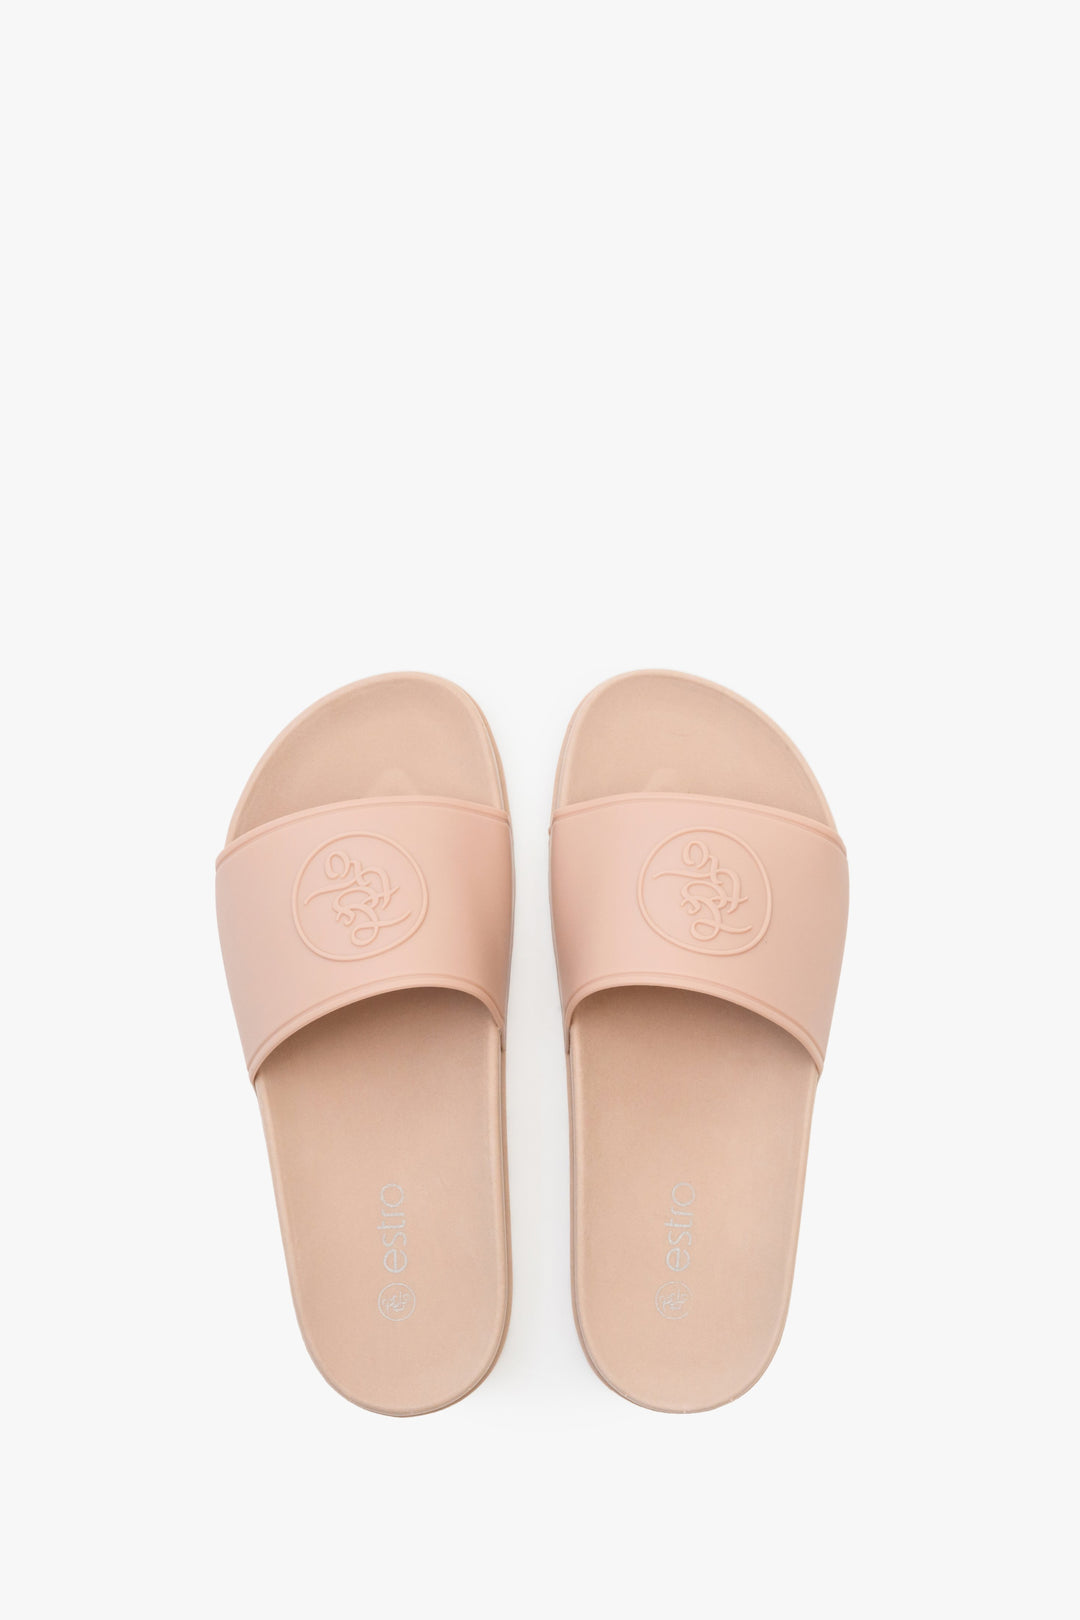 Women's light pink Estro rubber pool slides - presentation of the footwear from above.